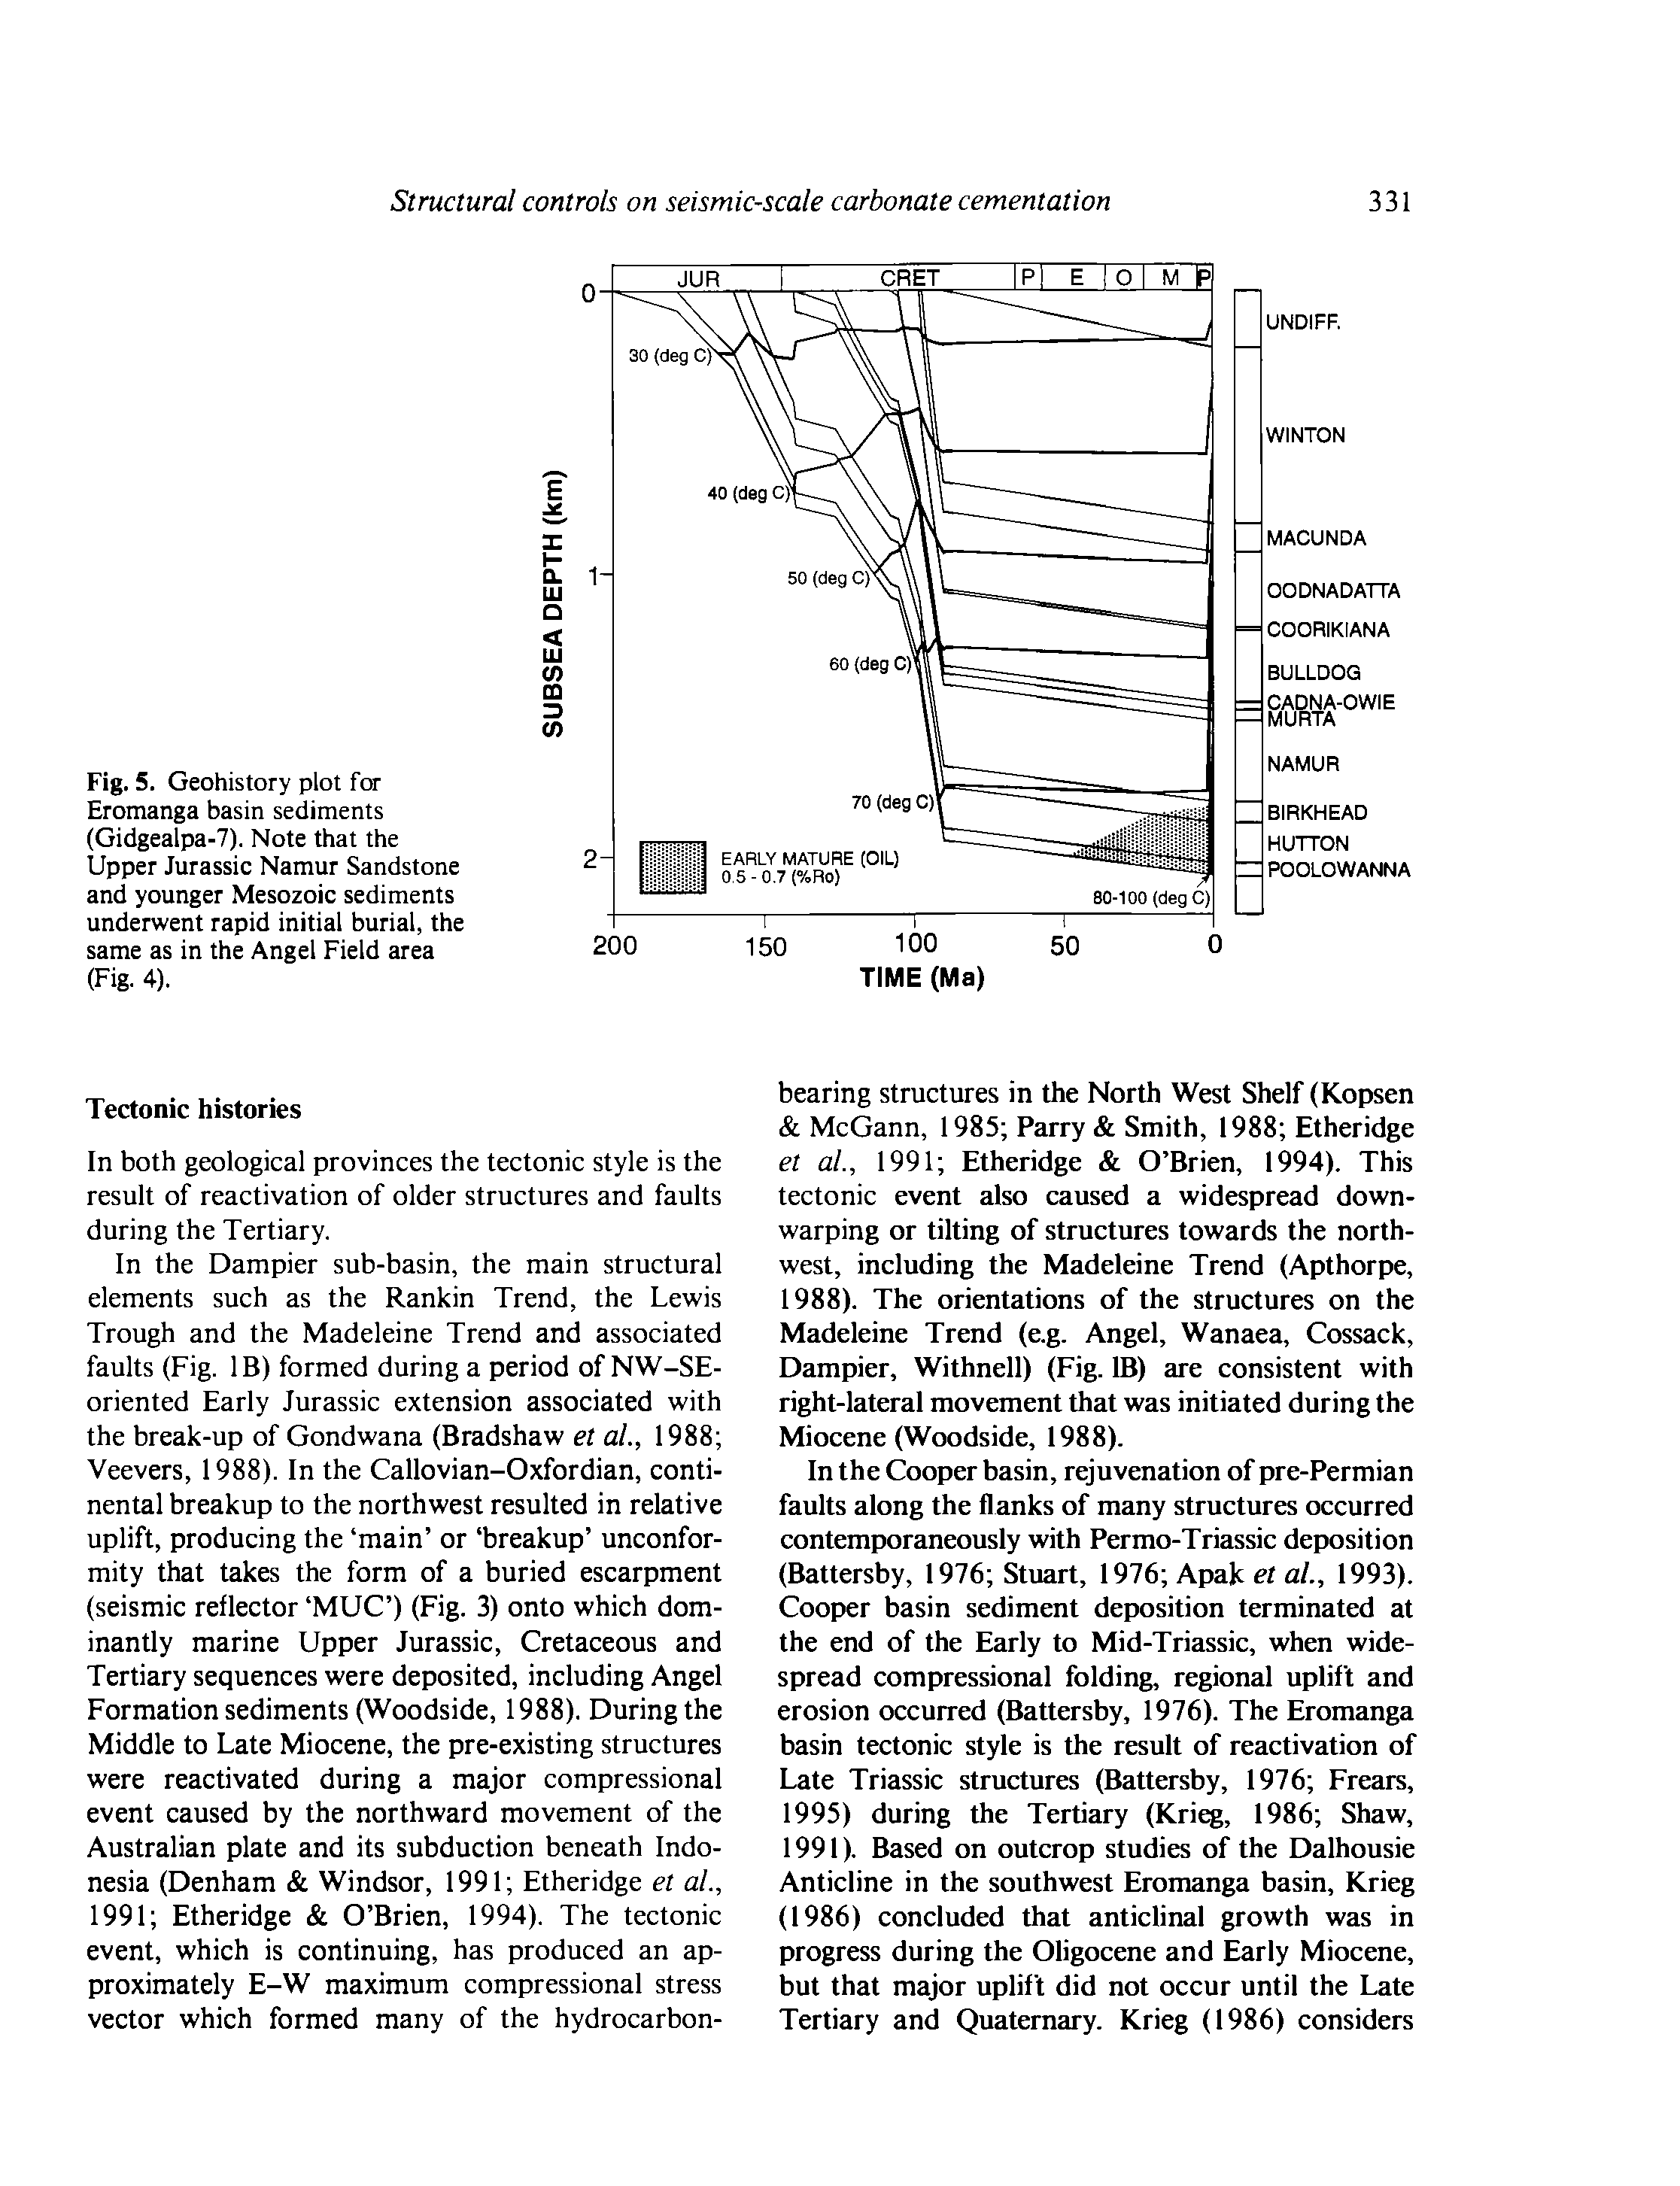 Fig. 5. Geohistory plot for Eromanga basin sediments (Gidgealpa-7). Note that the Upper Jurassic Namur Sandstone and younger Mesozoic sediments underwent rapid initial burial, the same as in the Angel Field area (Fig. 4).